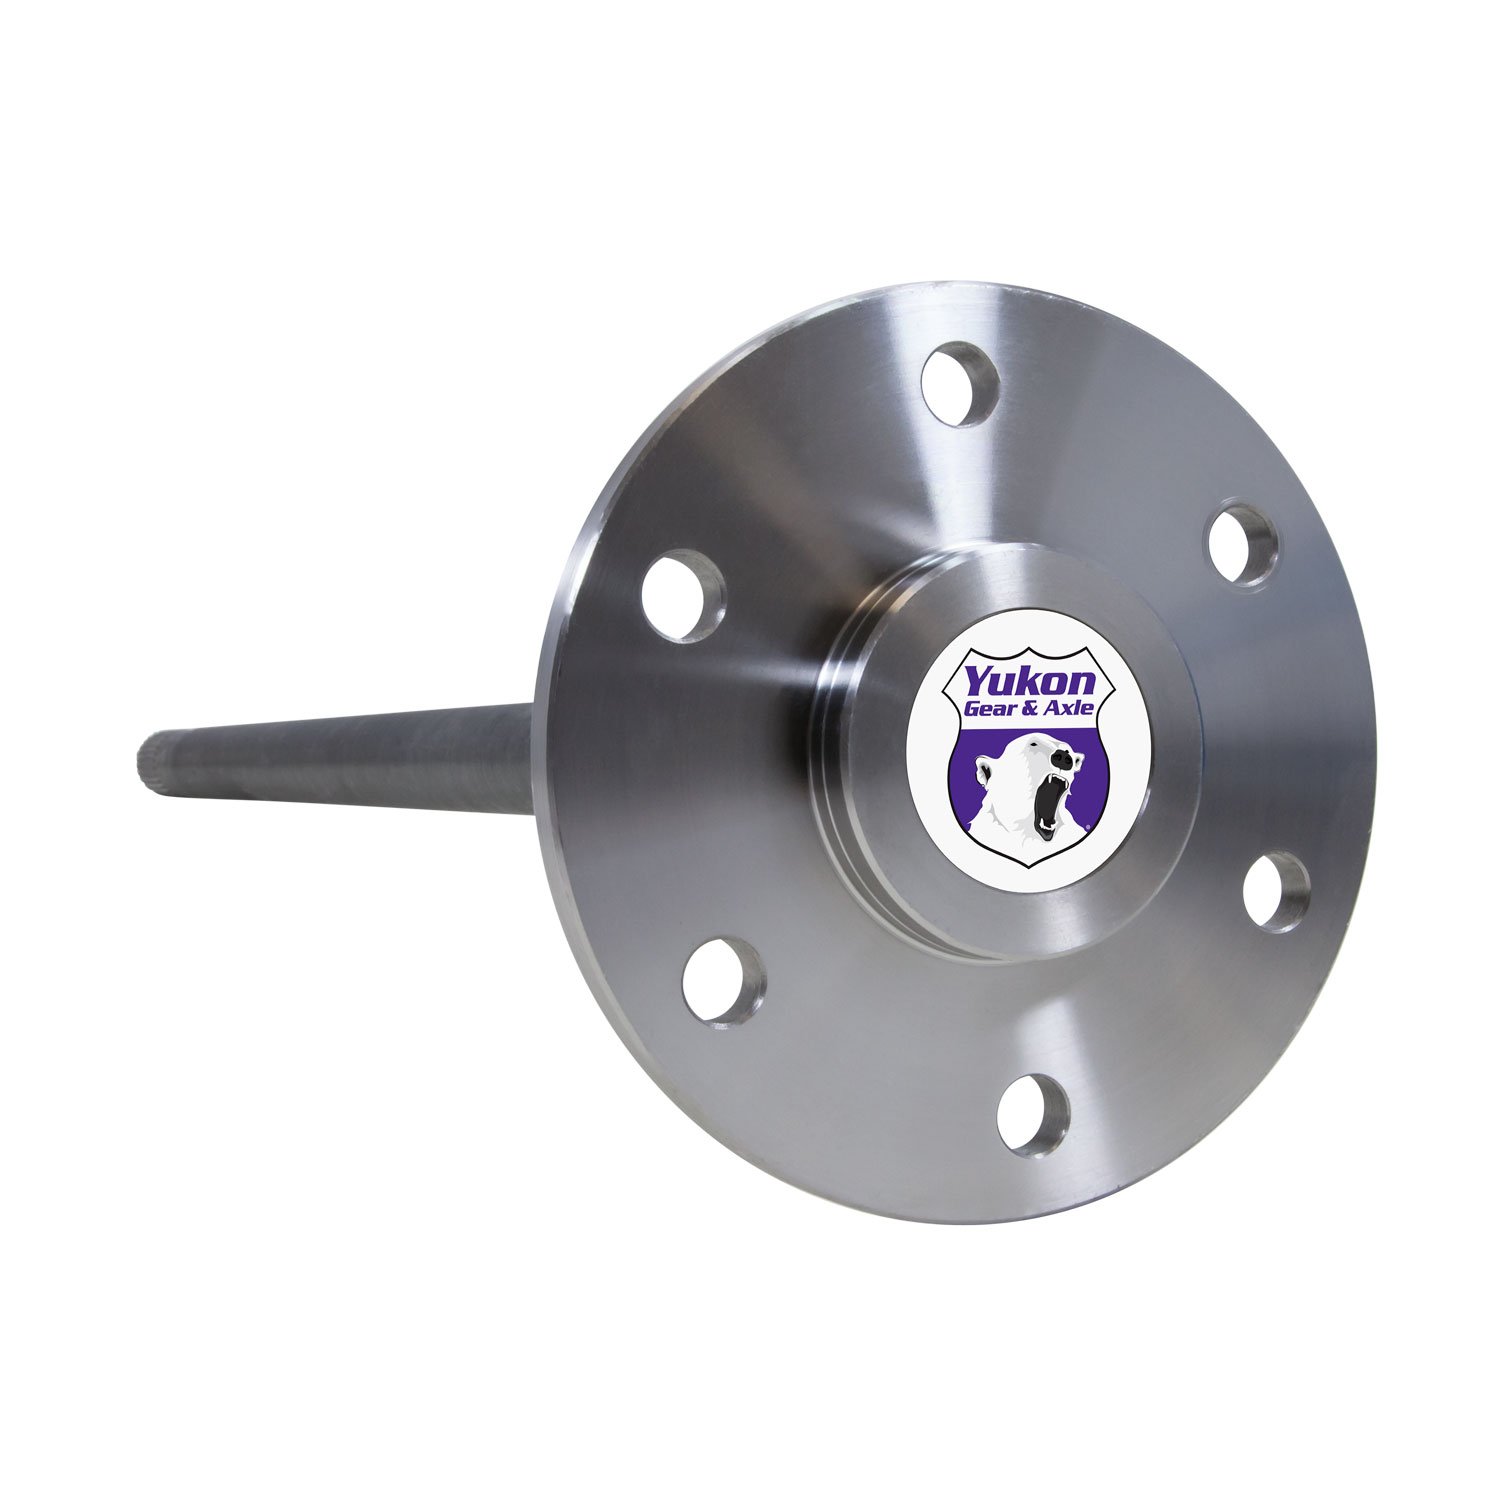 1541H Alloy 8 Lug Rear Axle For GM 9.5 in. Hummer H2 With 33 Splines